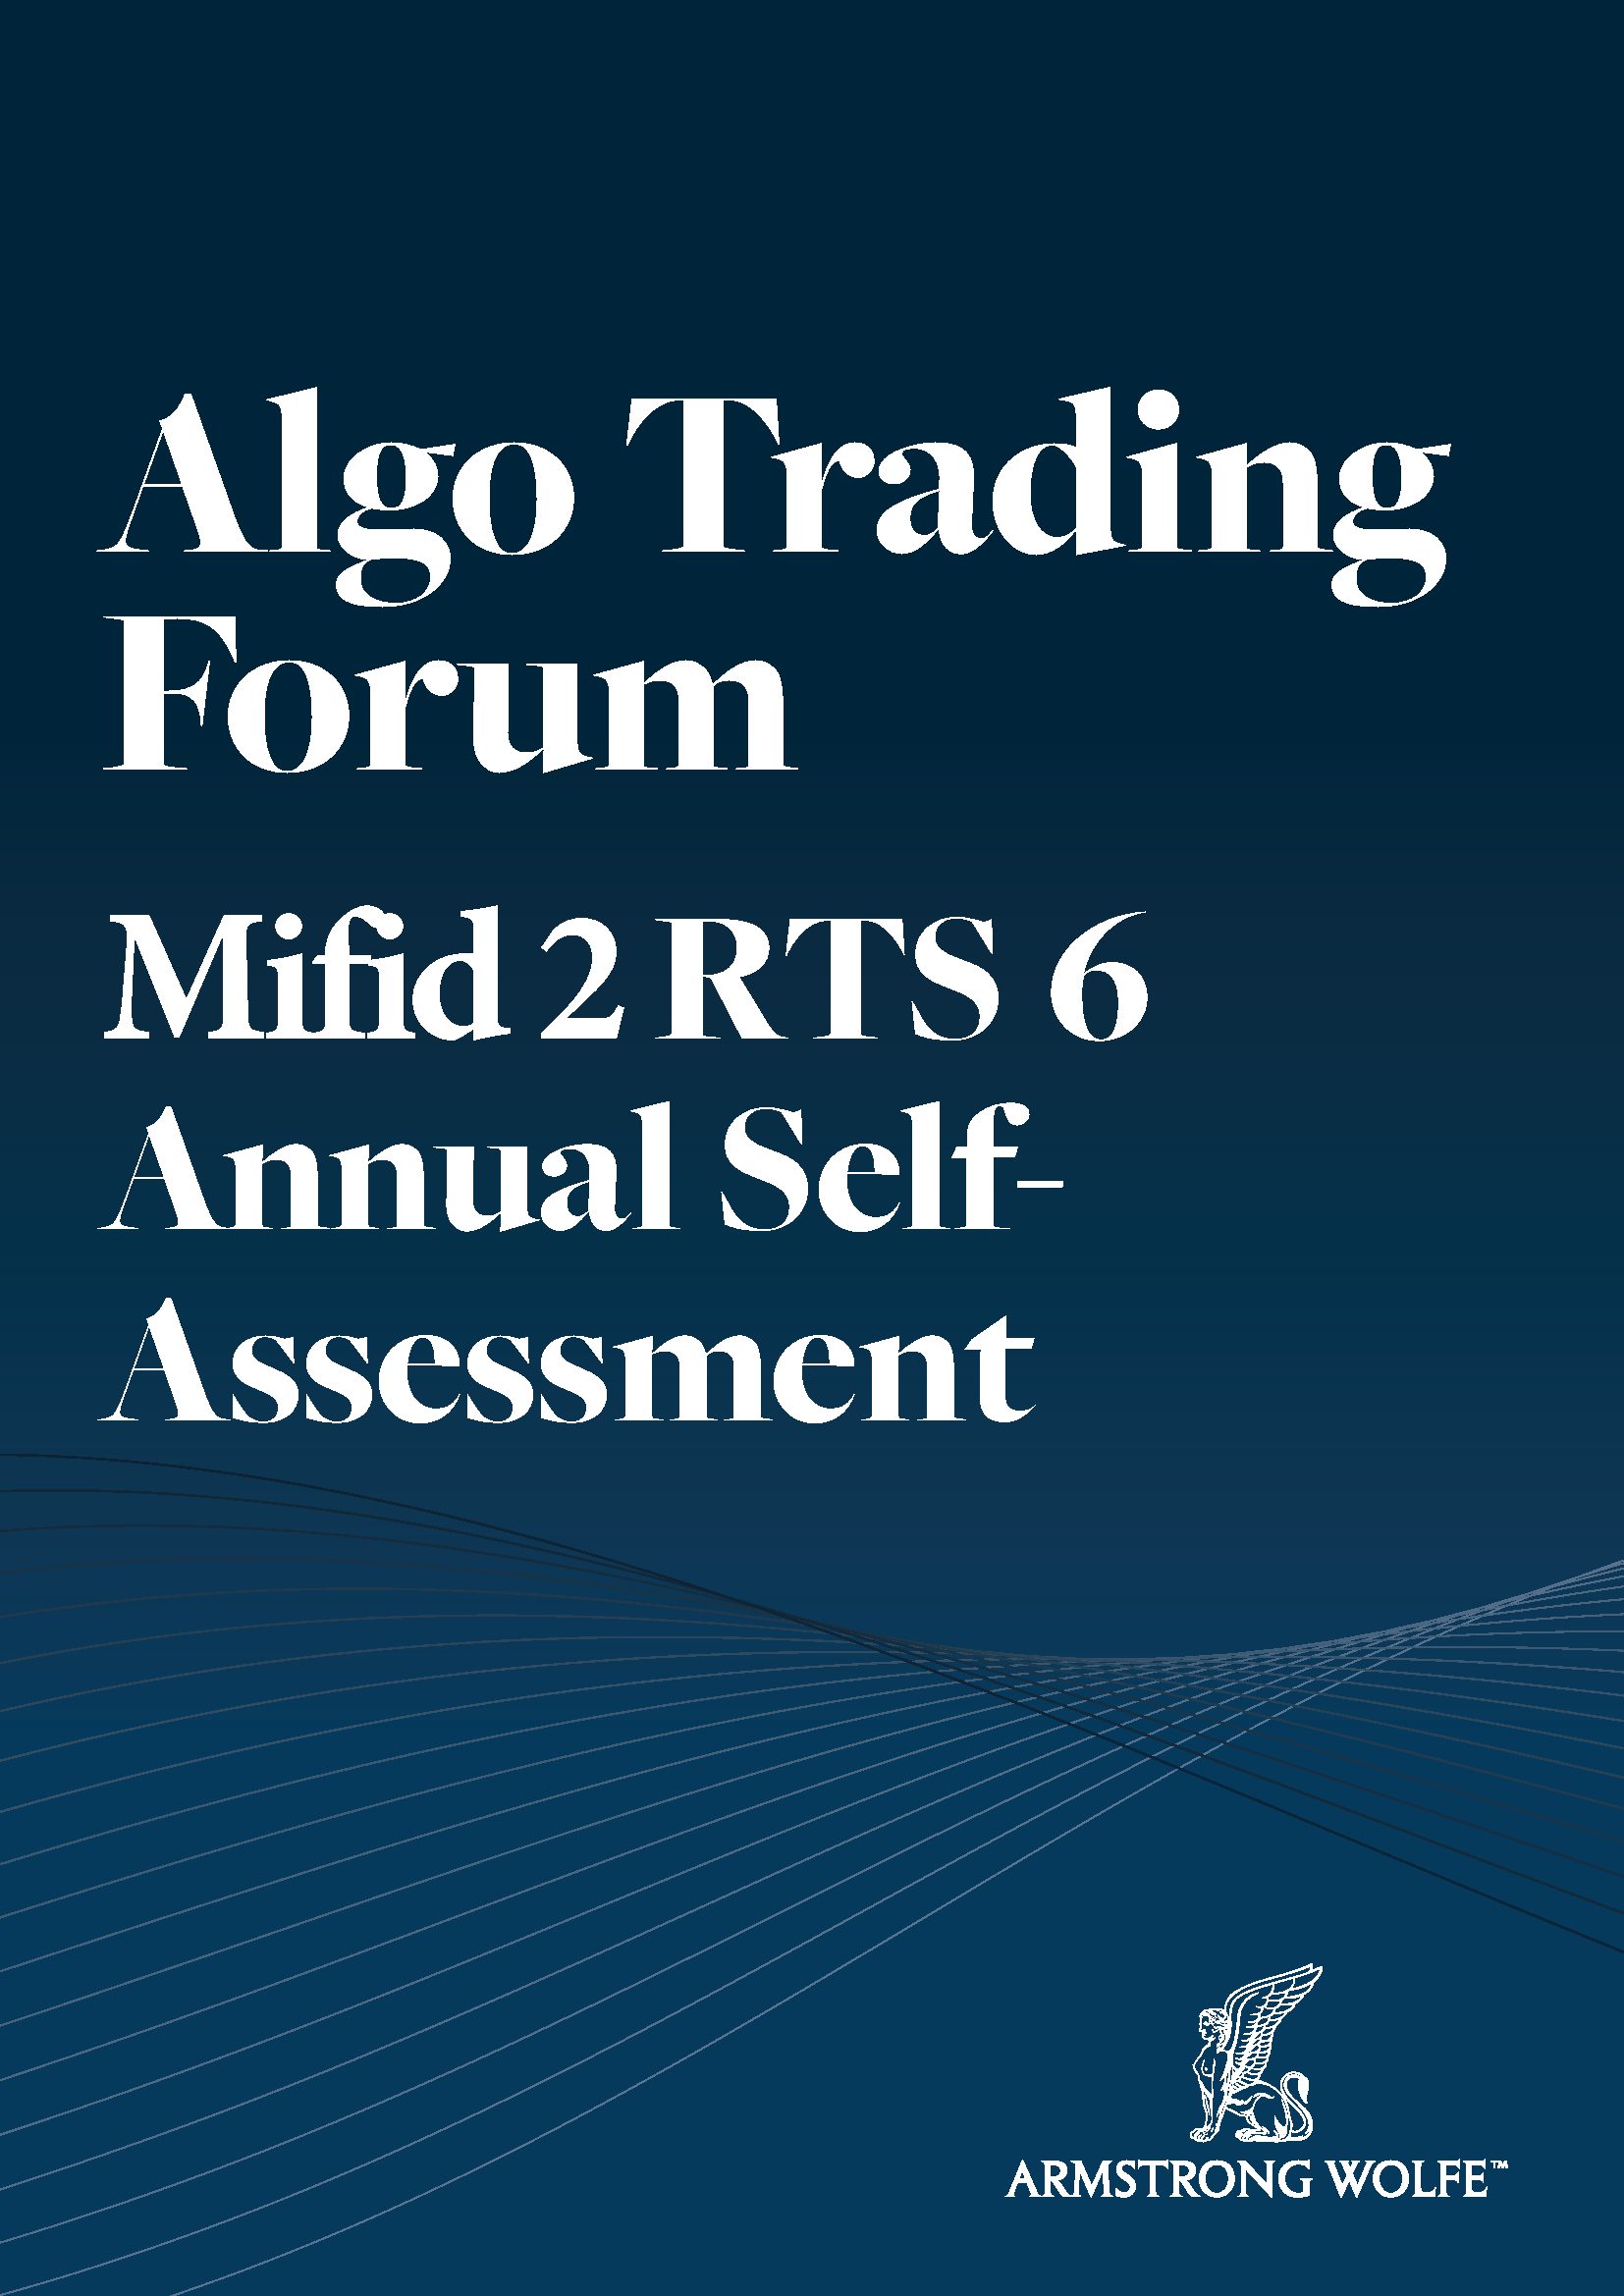 Algo Trading Forum – Mifid 2 RTS 6 Annual Self-Assessment